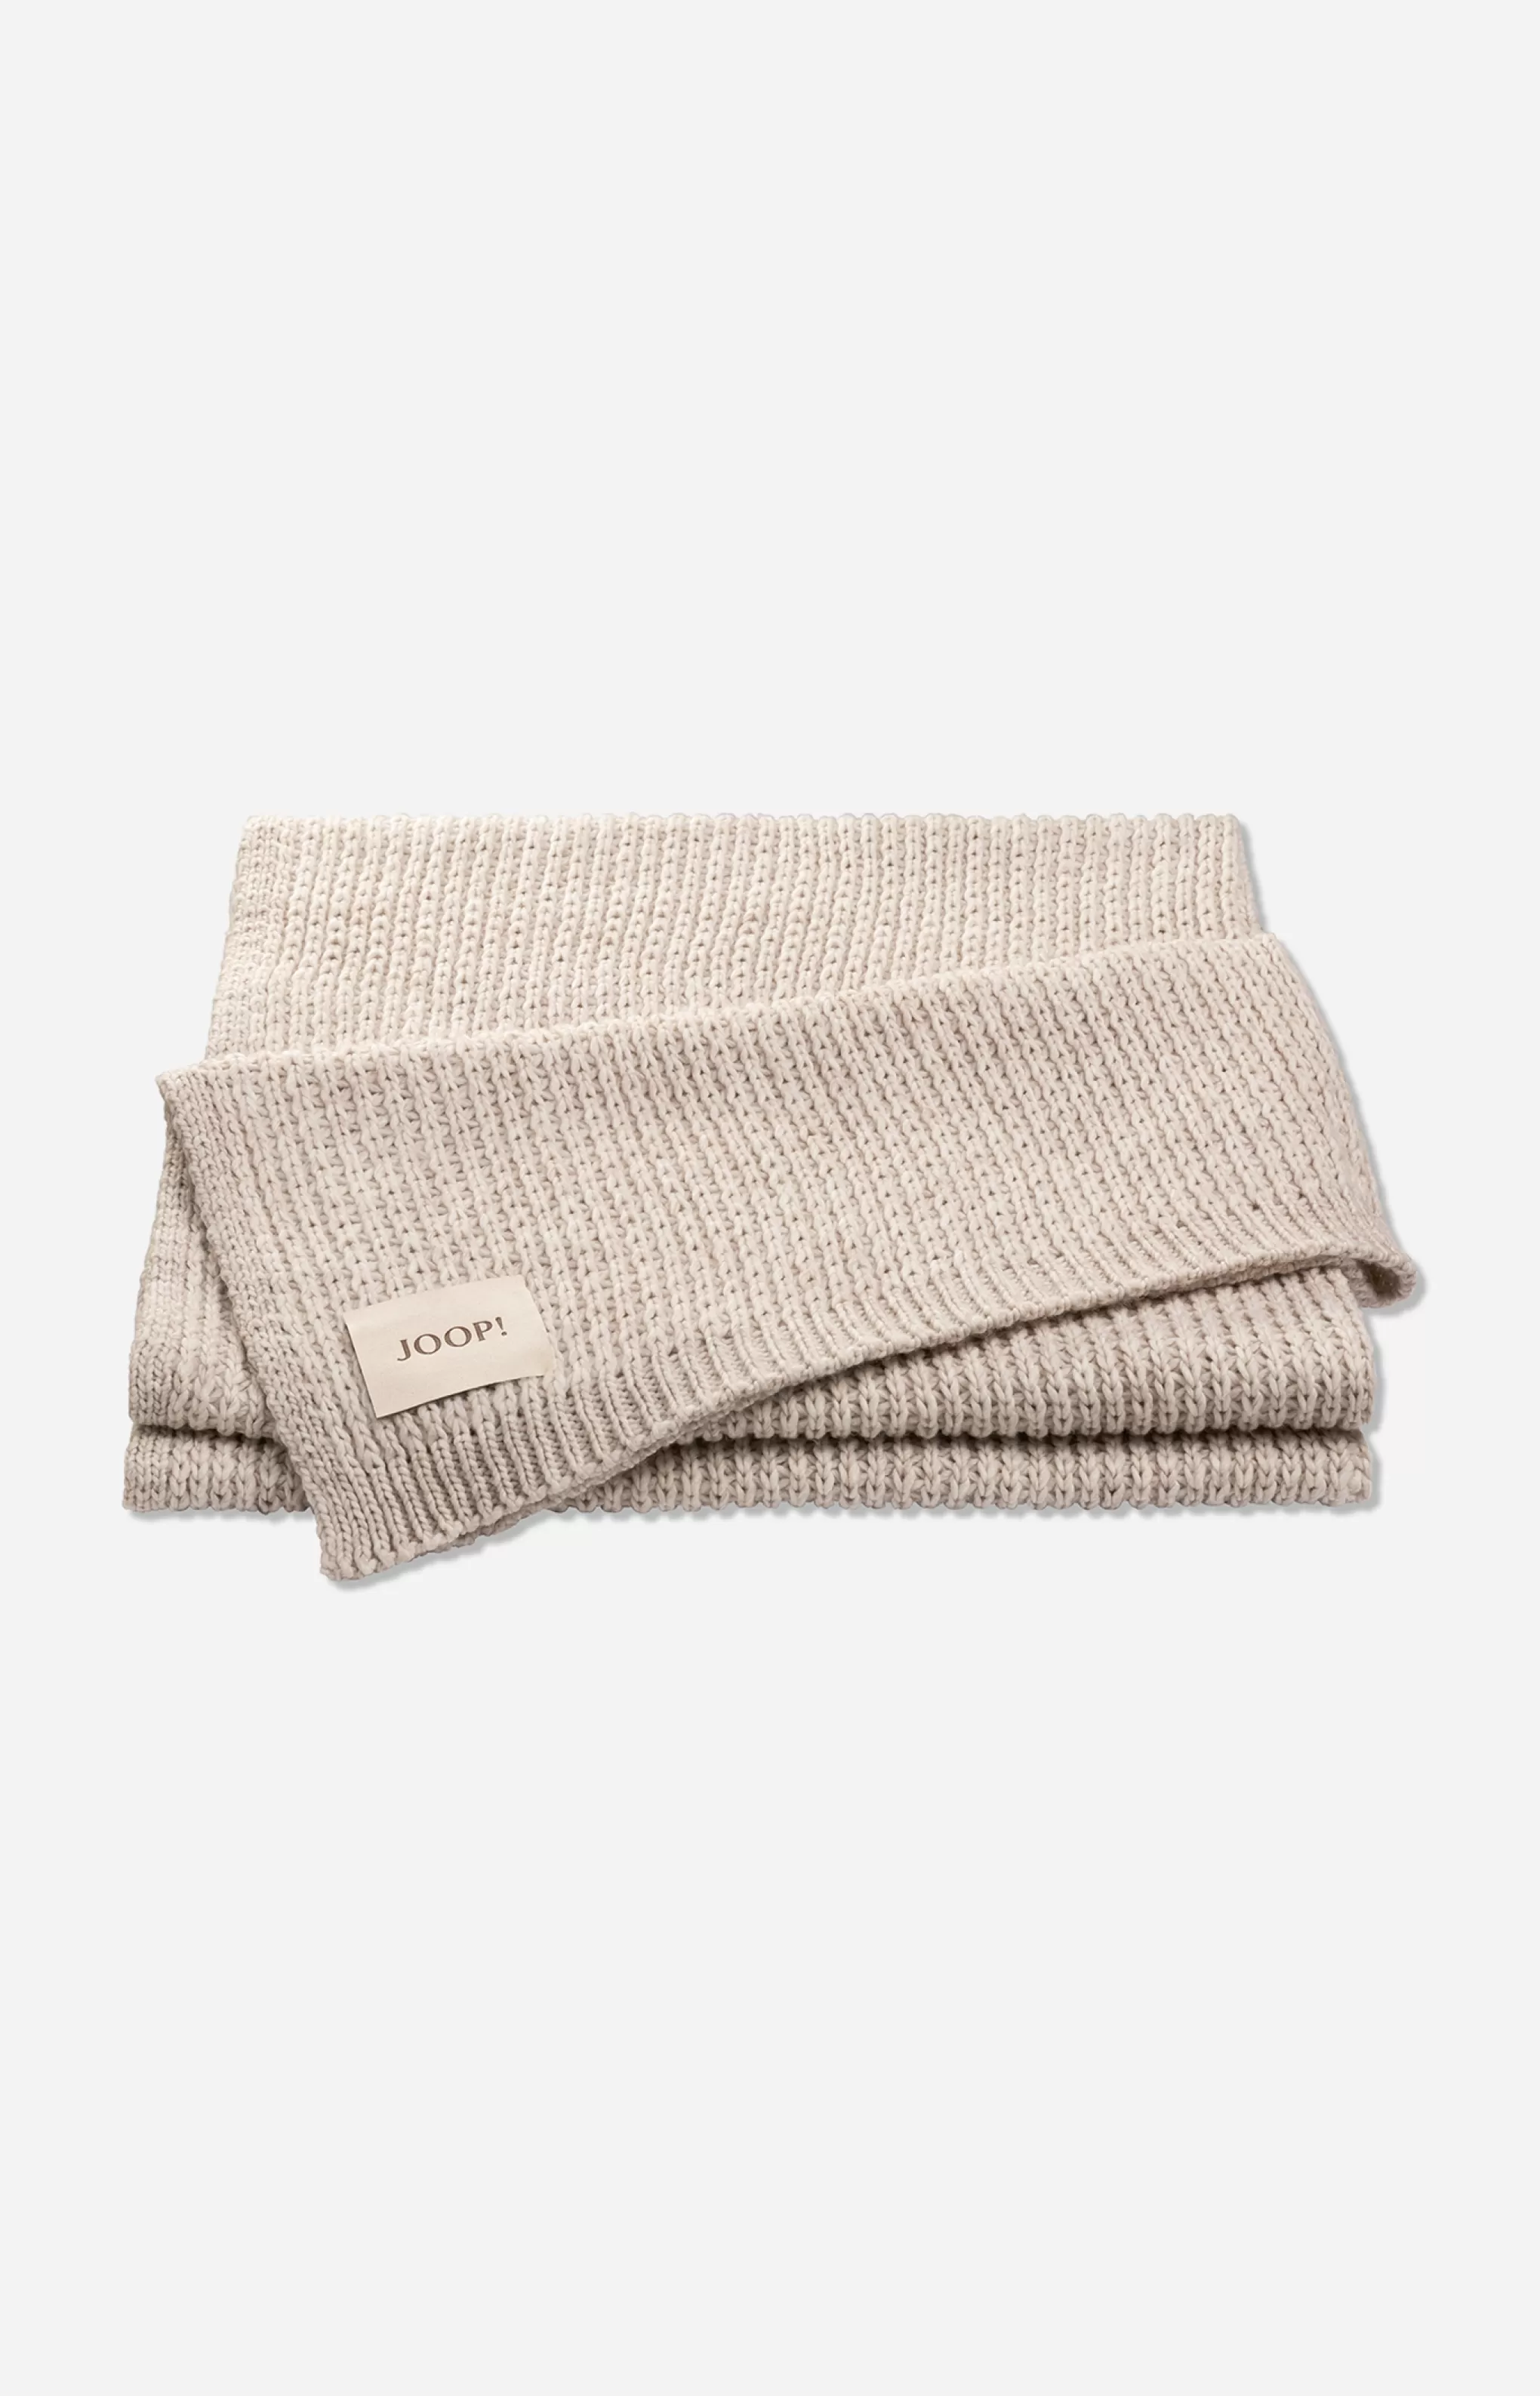 Throws & Blankets | Discover Everything*JOOP Throws & Blankets | Discover Everything ! DOUBLE KNIT Blanket in Neutral